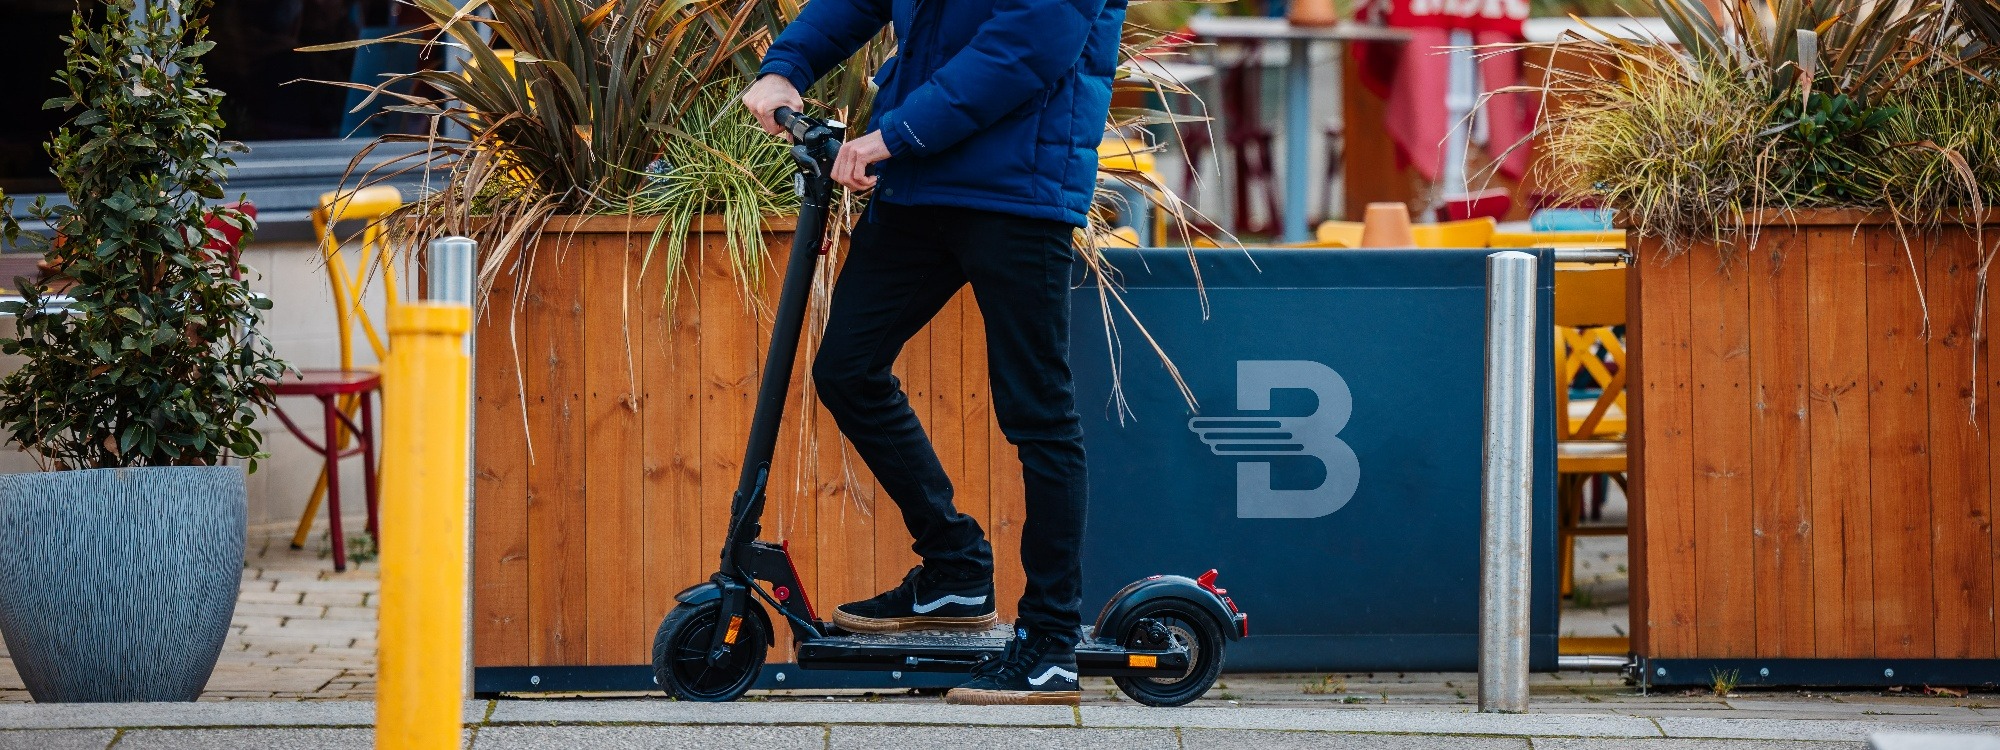 busbi-wasp-scooter-lifestyle-78-1-2